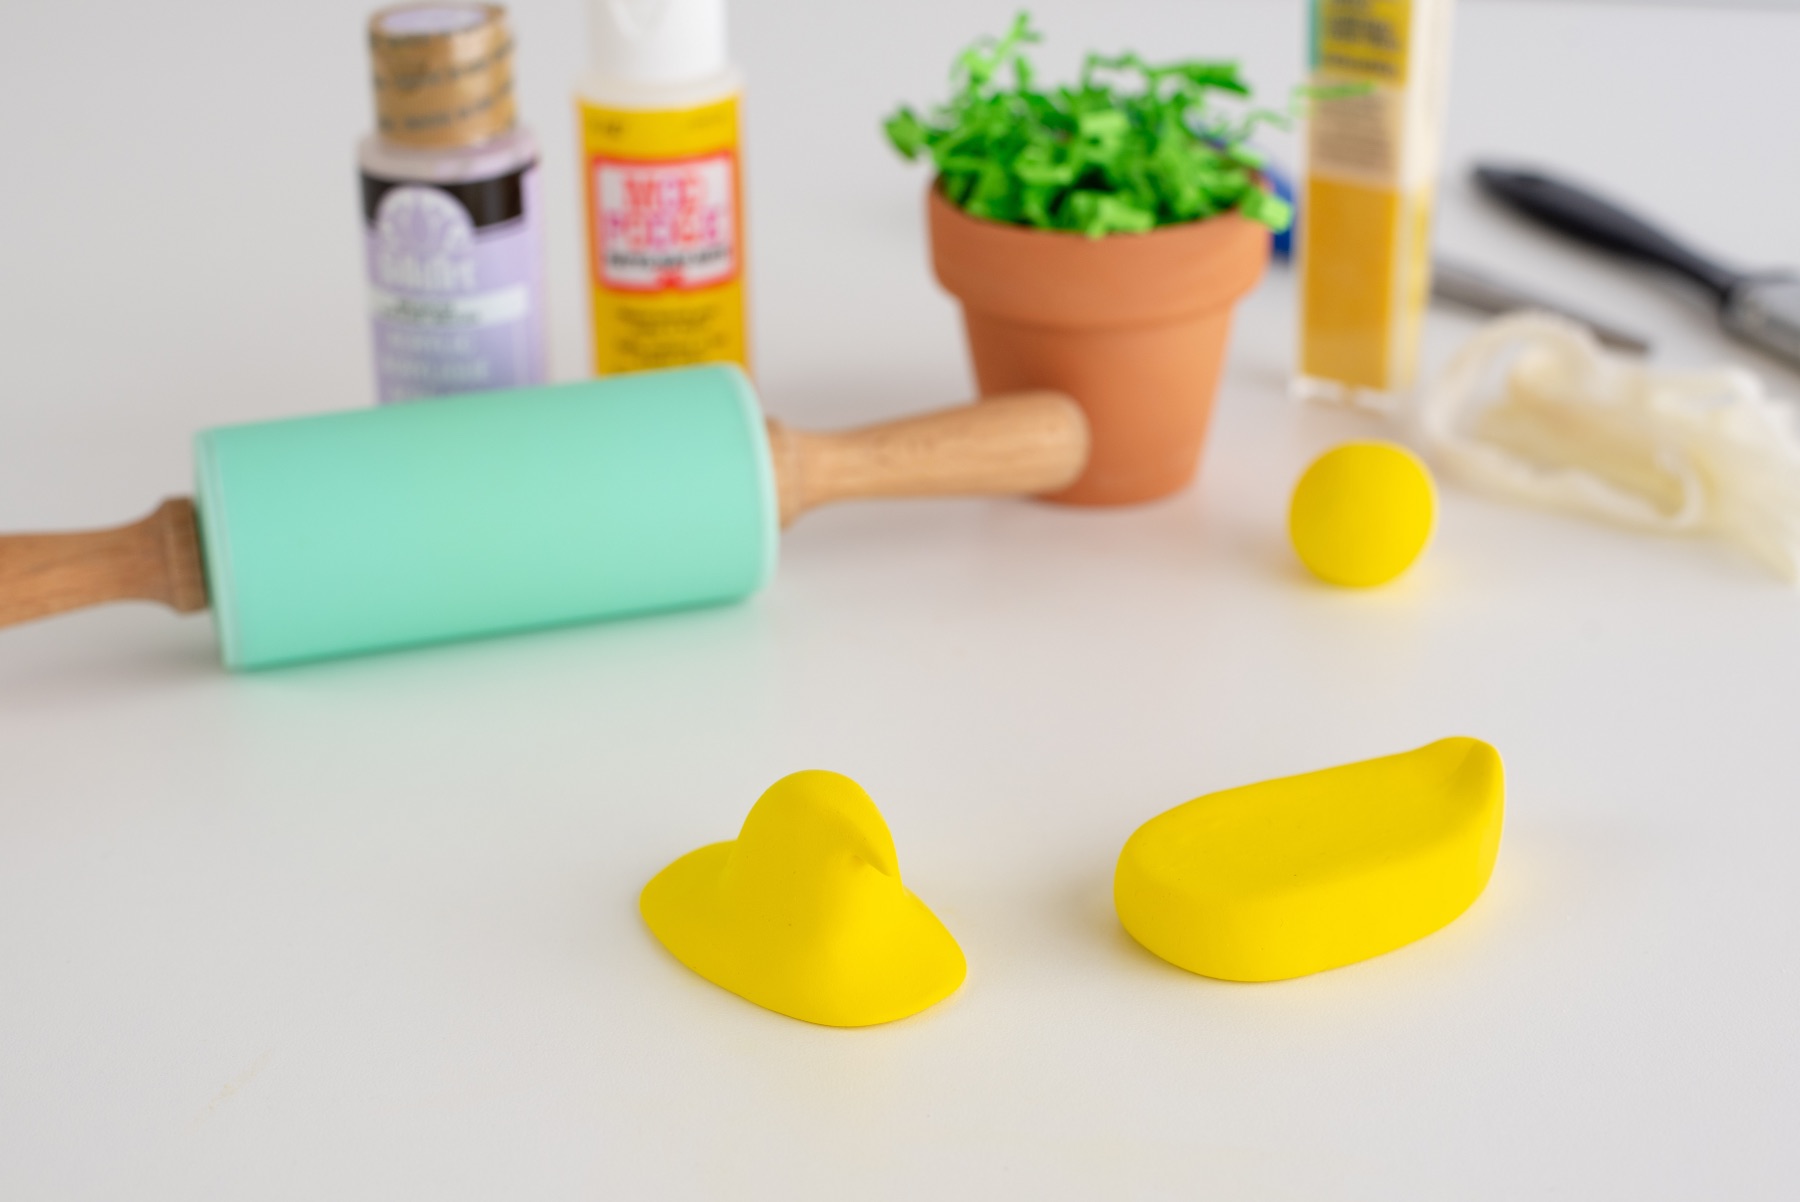 form the clay into an Easter candy marshmallow Peep